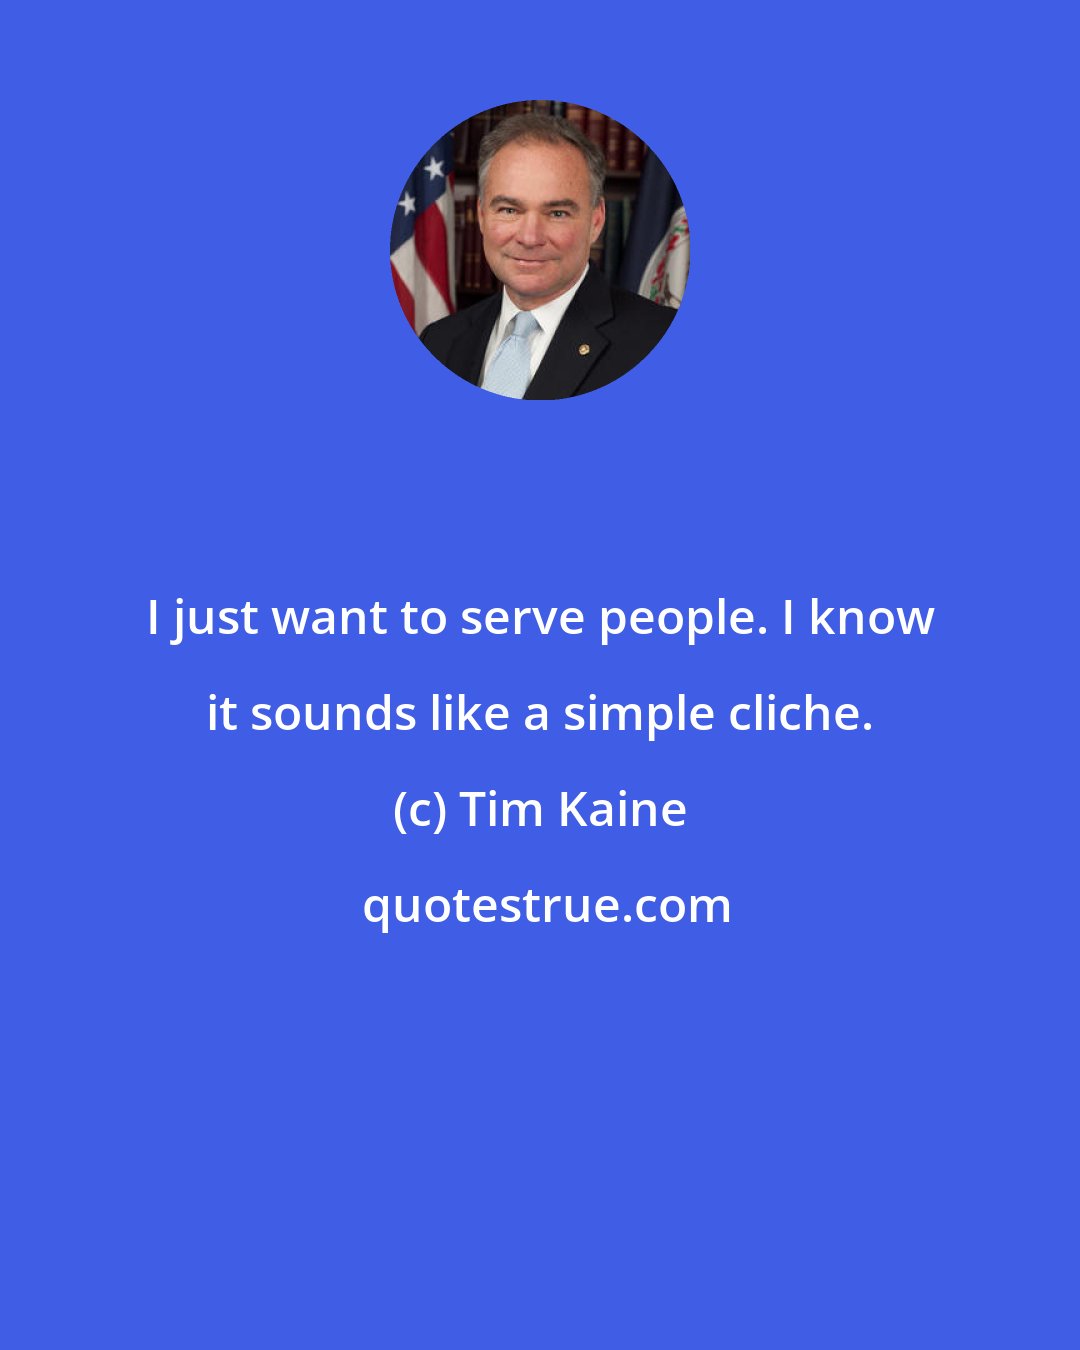 Tim Kaine: I just want to serve people. I know it sounds like a simple cliche.